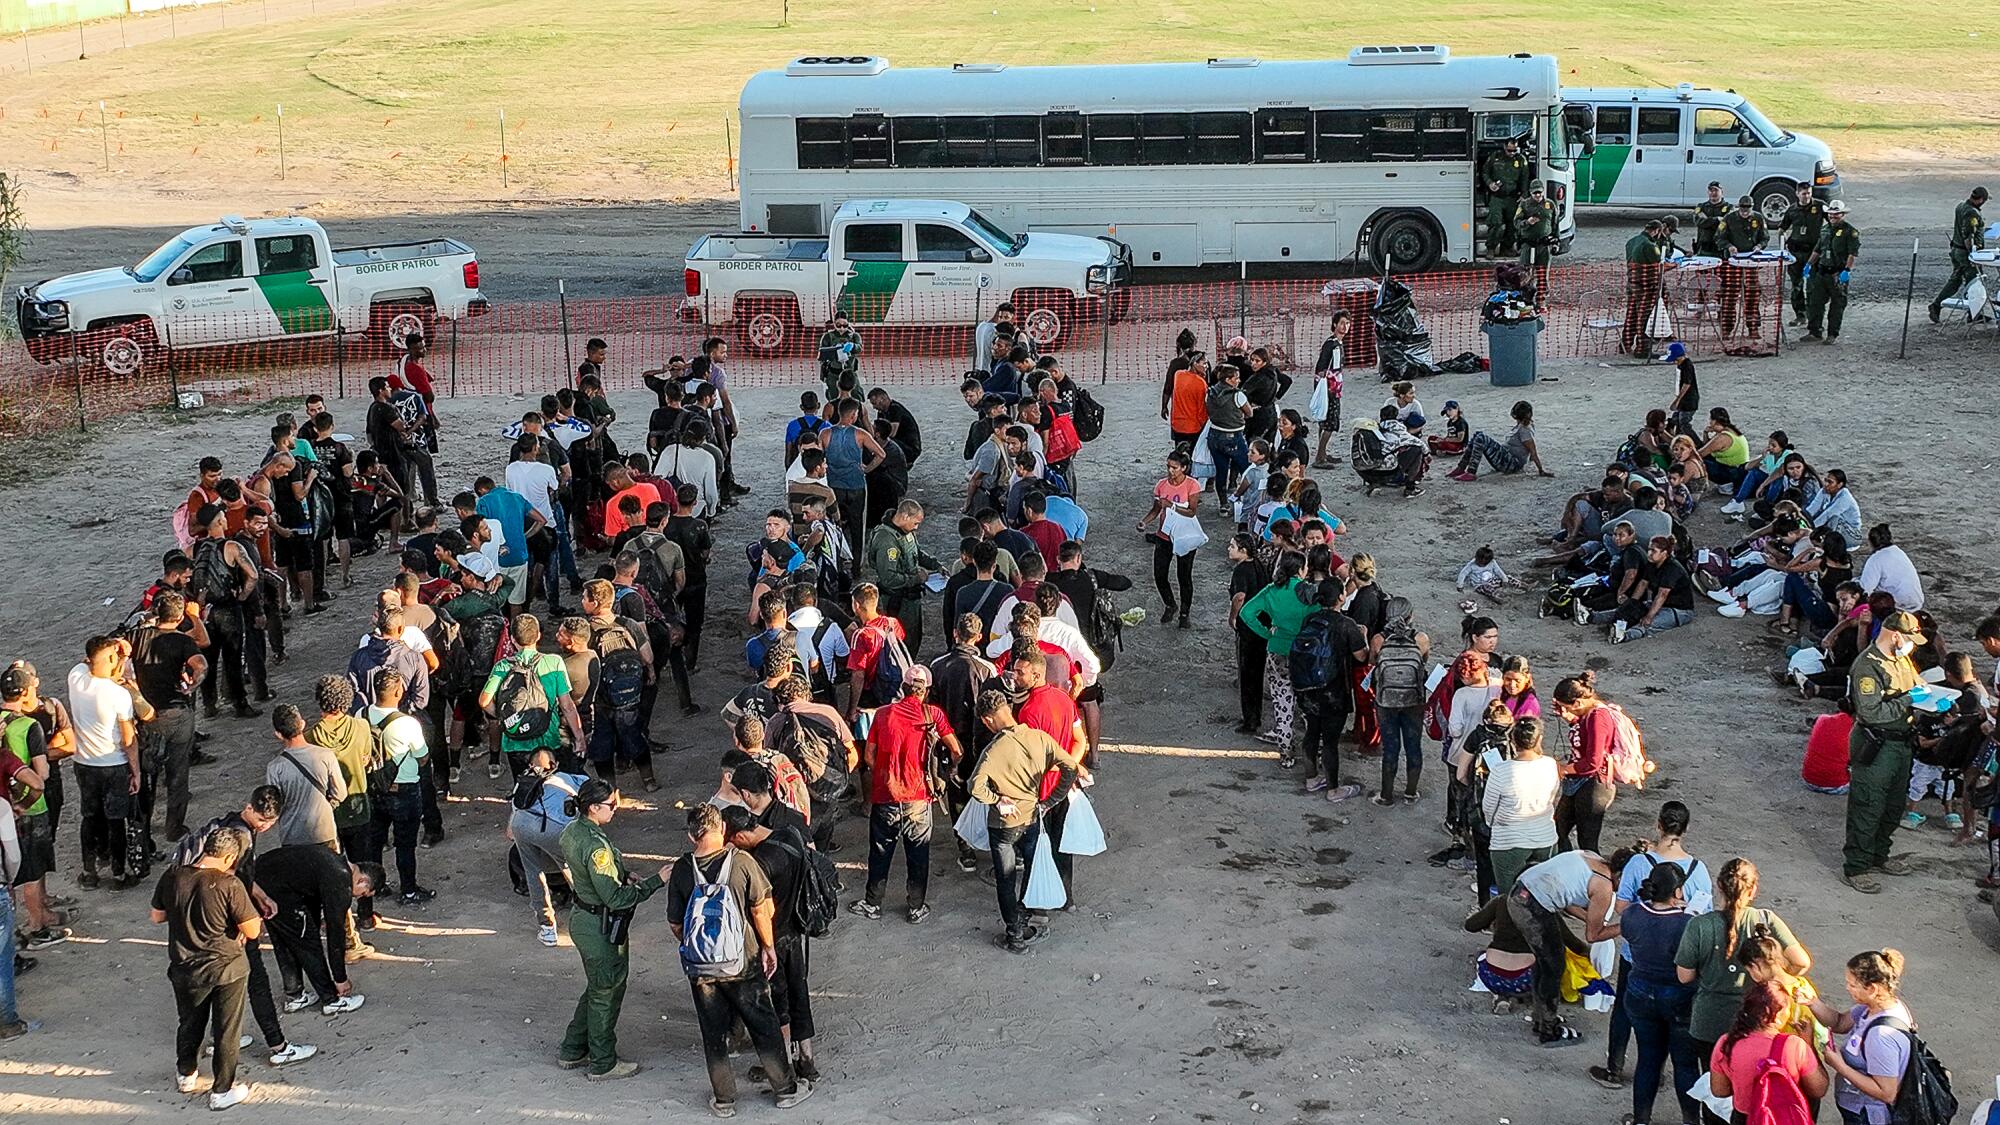 An aerial view of migrants forming lines in a barren lot beside several vehicles